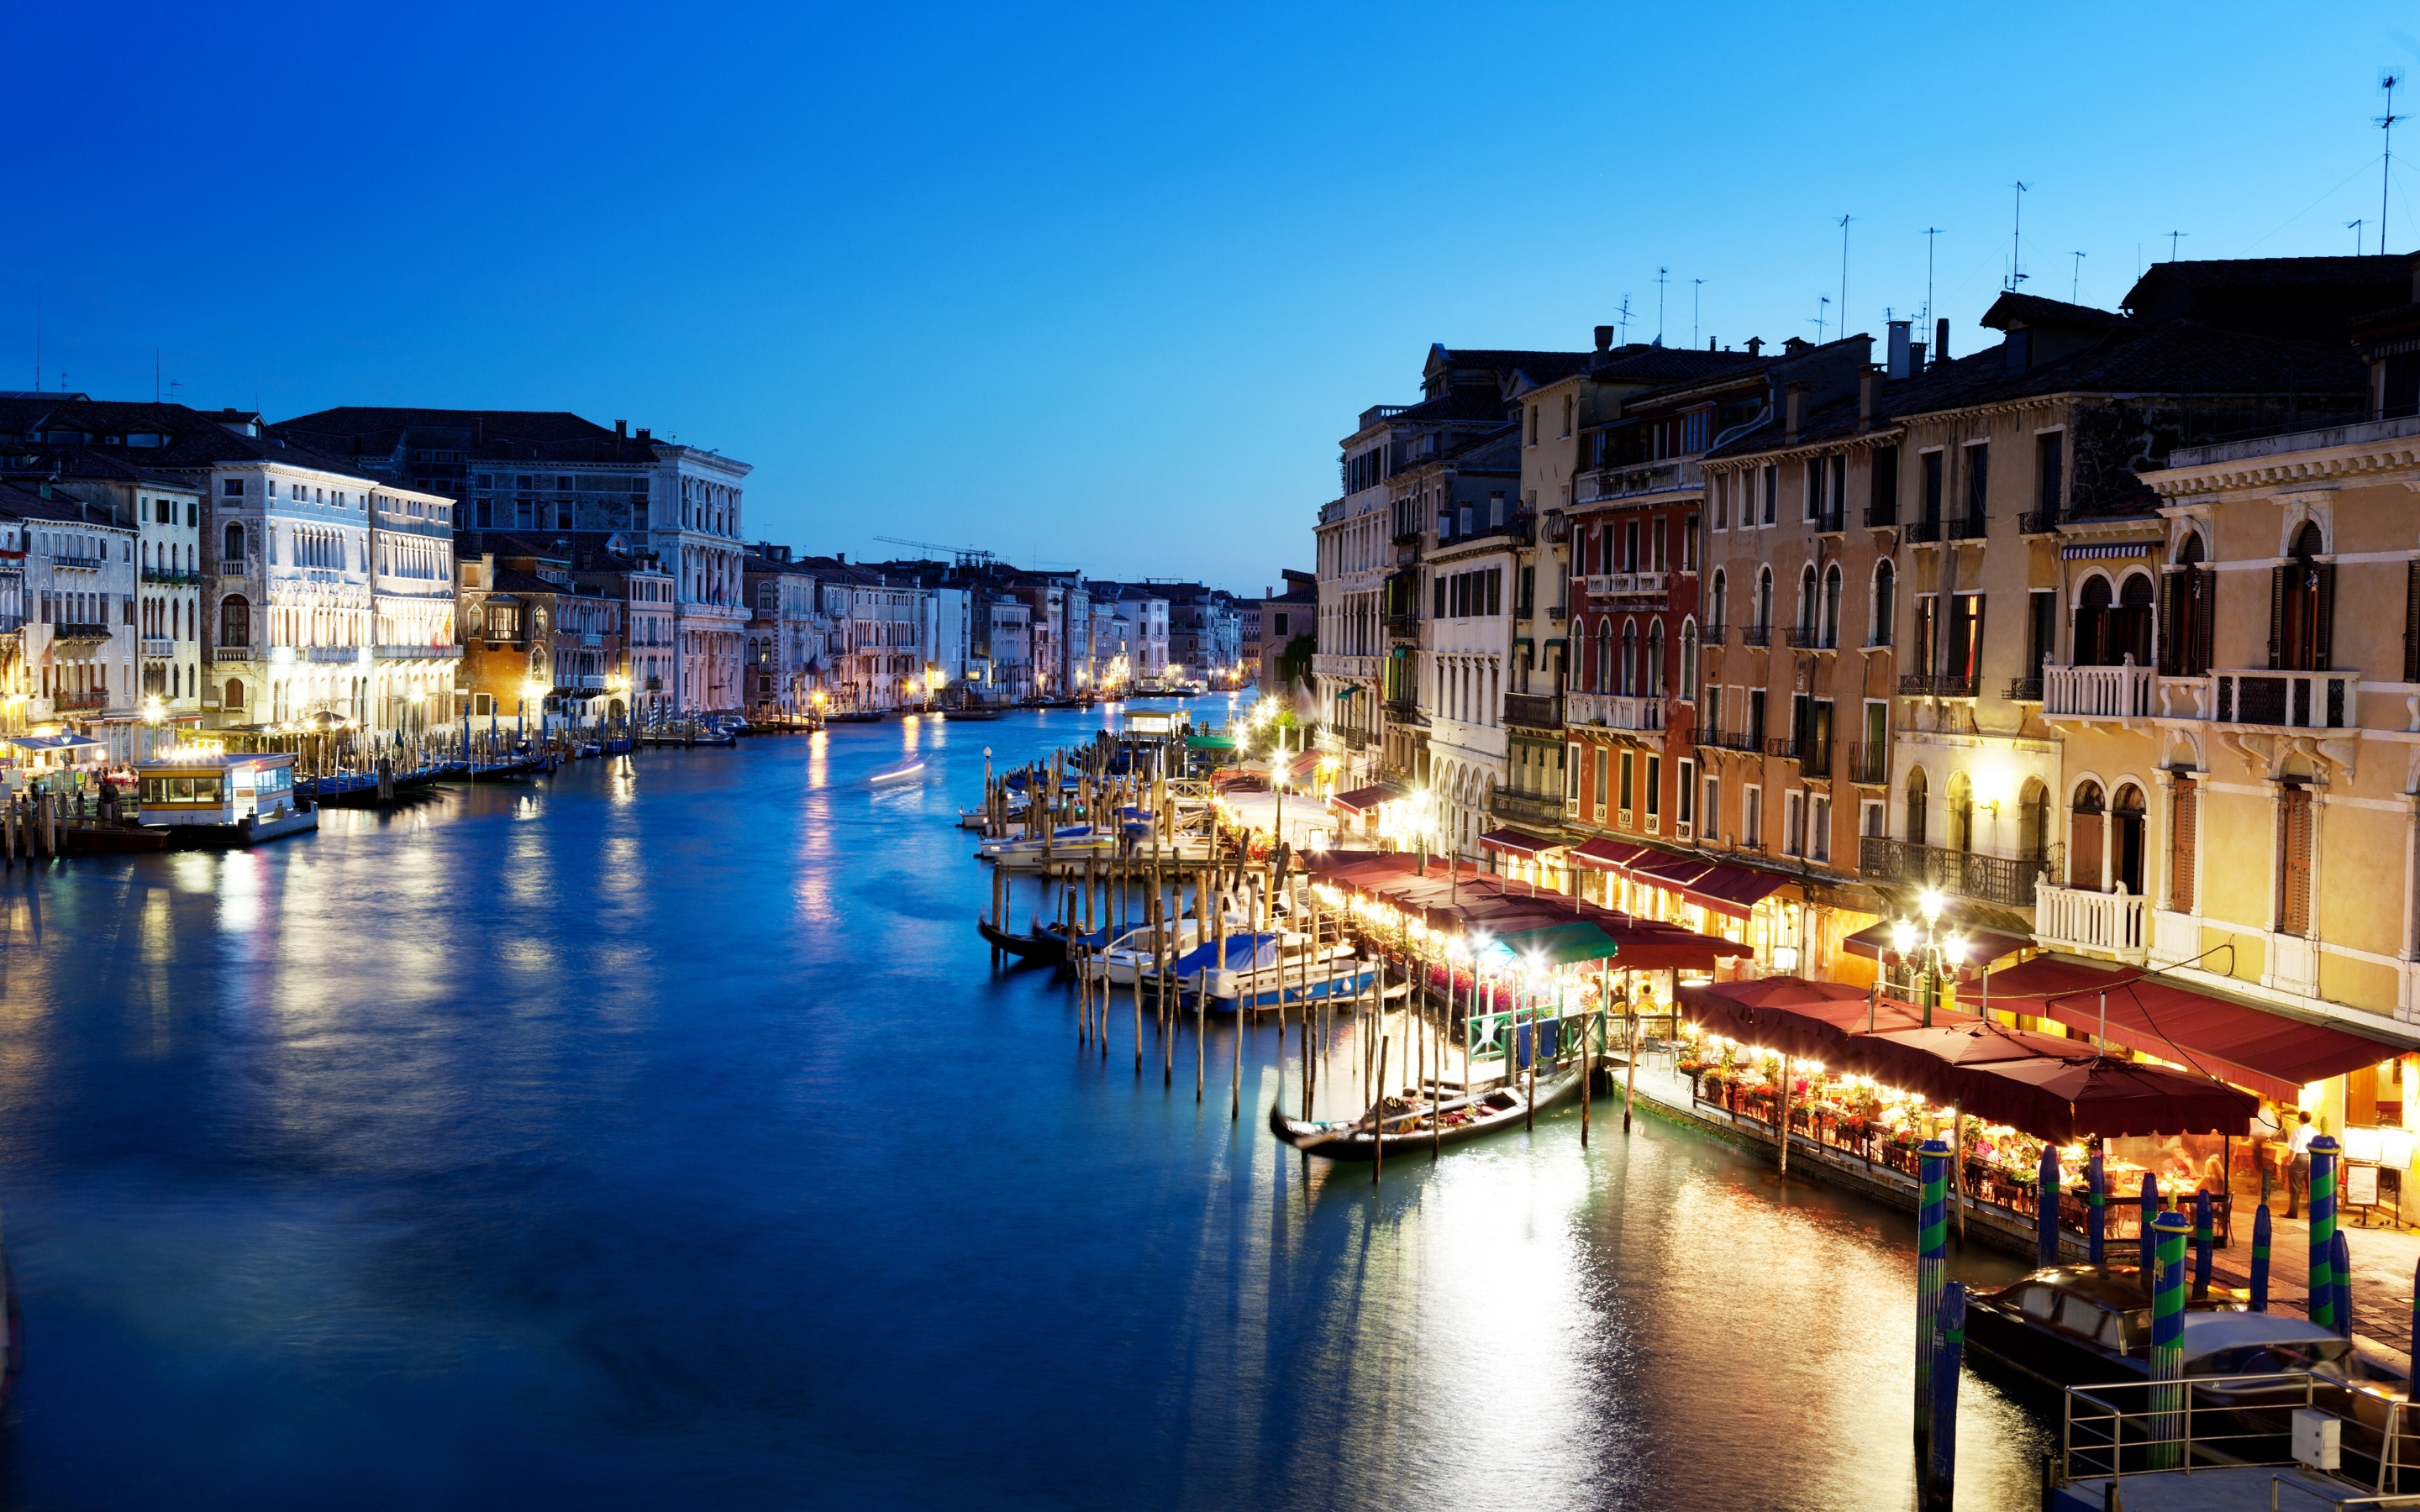 Grand Canal Venice for 2880 x 1800 Retina Display resolution